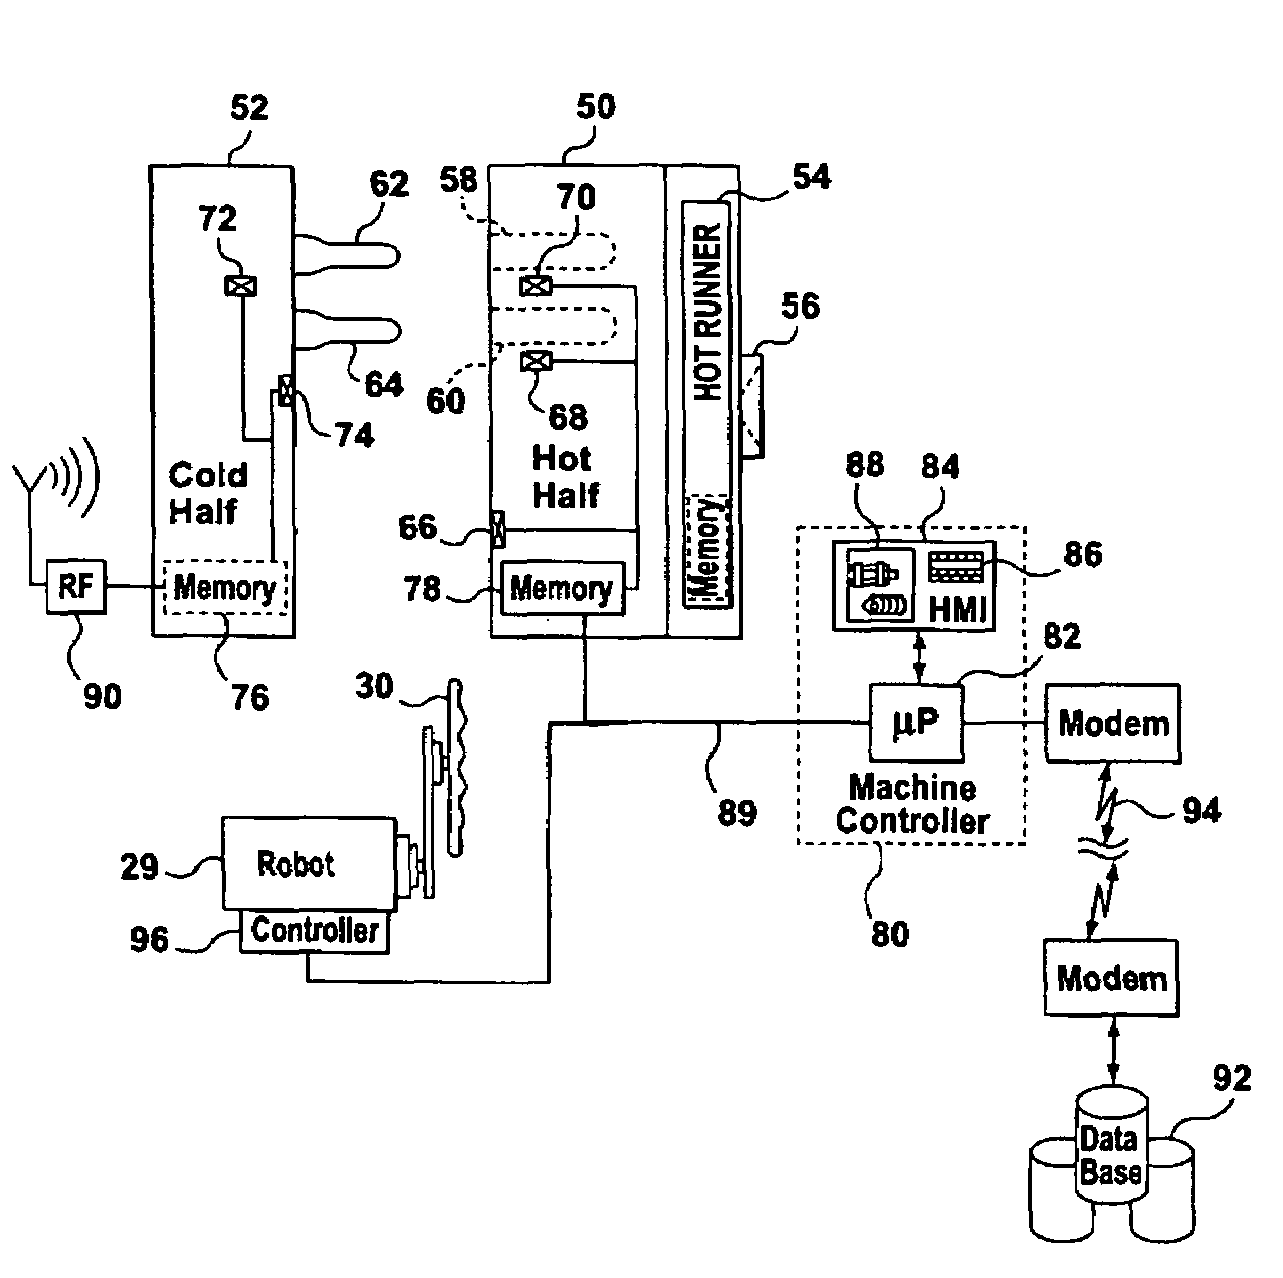 Intelligent molding environment and method of configuring a molding system